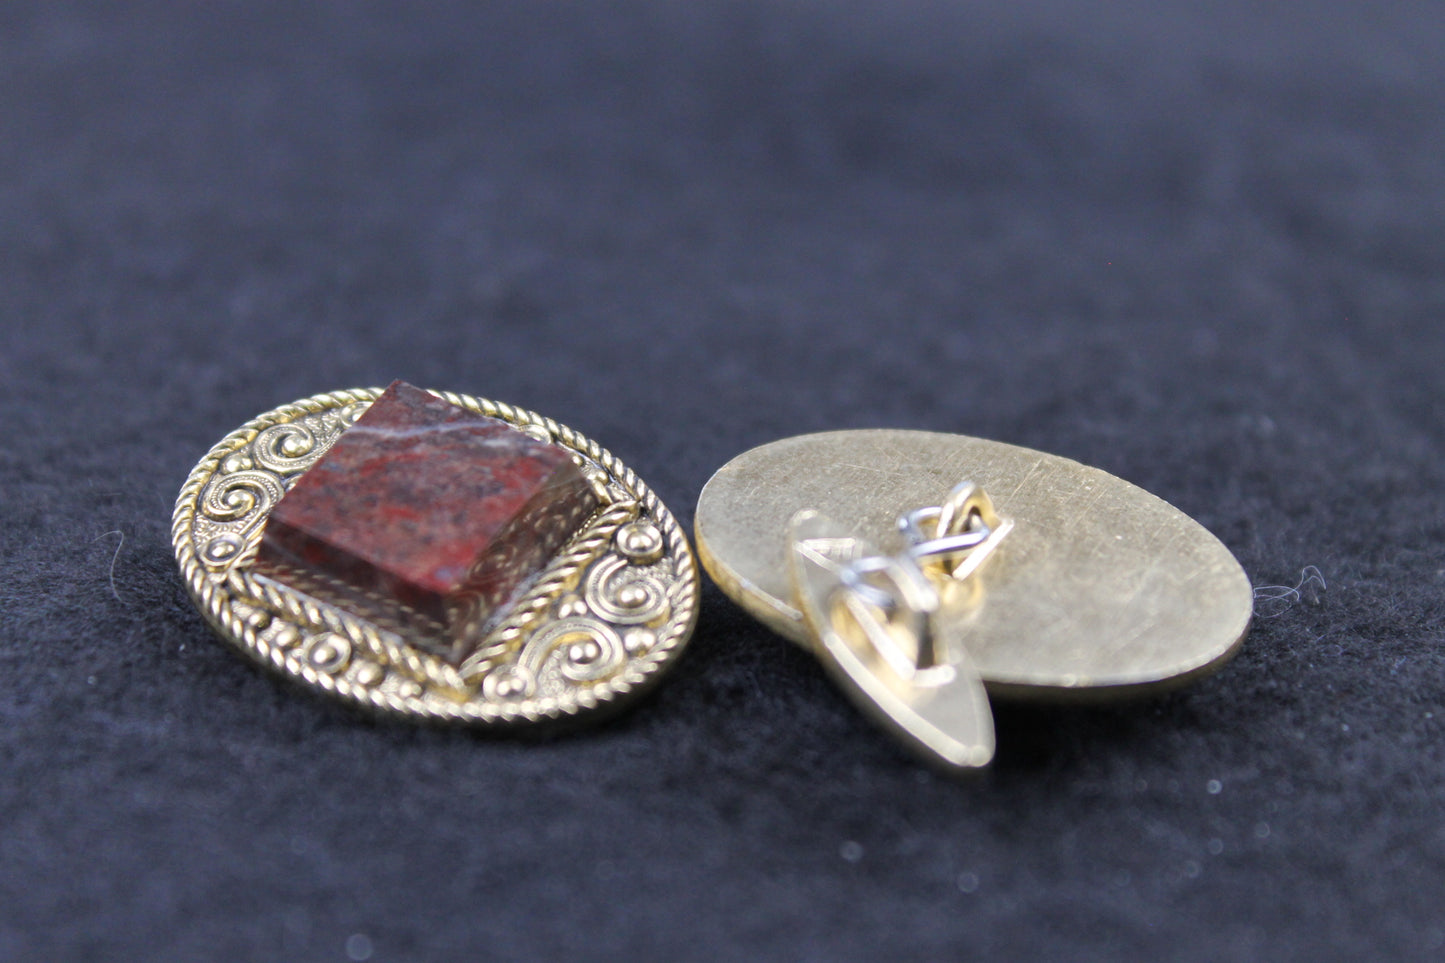 Vintage Oval Cufflinks with Square Brown Stone